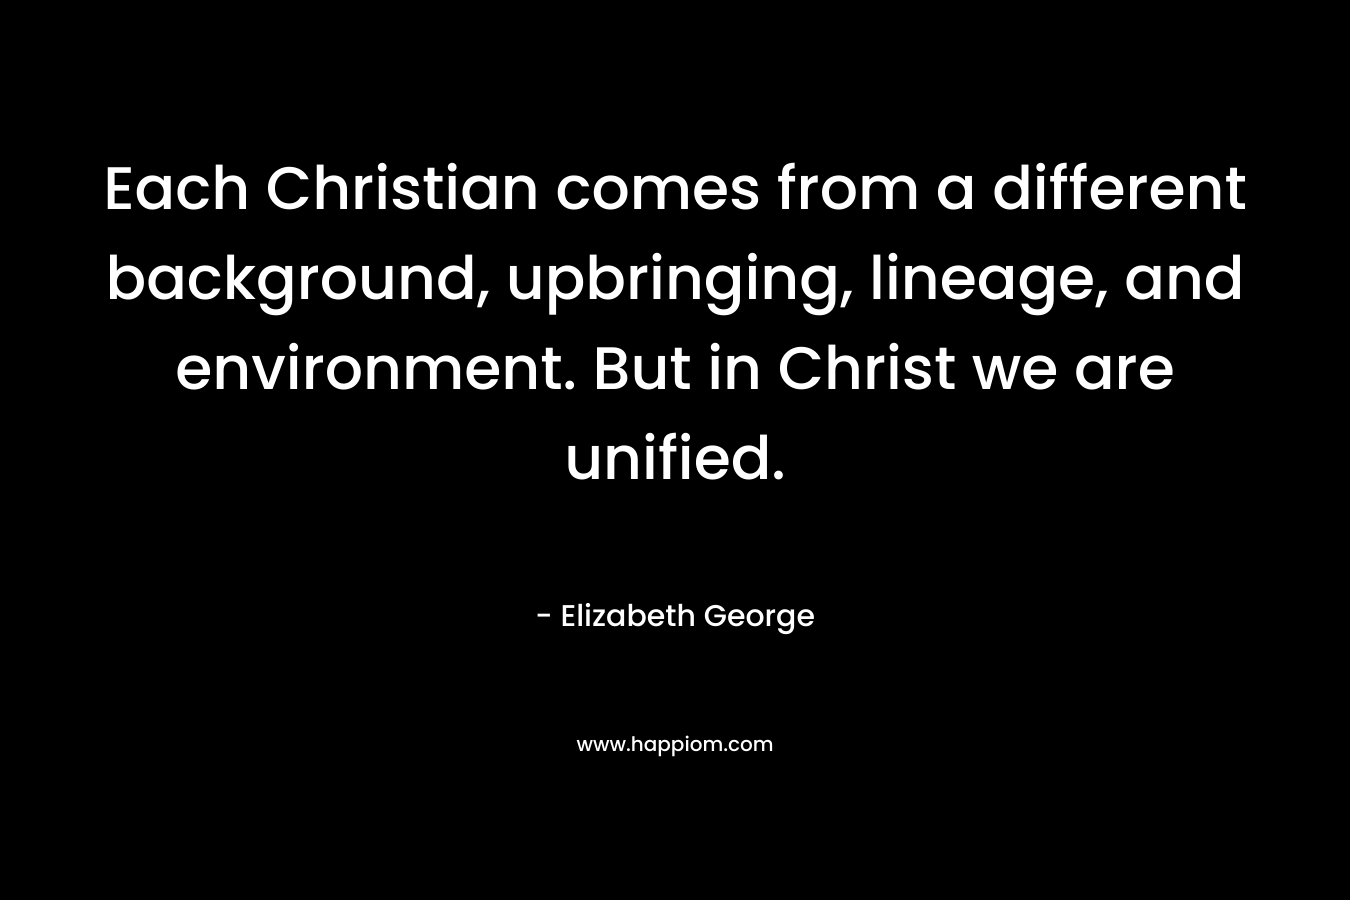 Each Christian comes from a different background, upbringing, lineage, and environment. But in Christ we are unified. – Elizabeth George